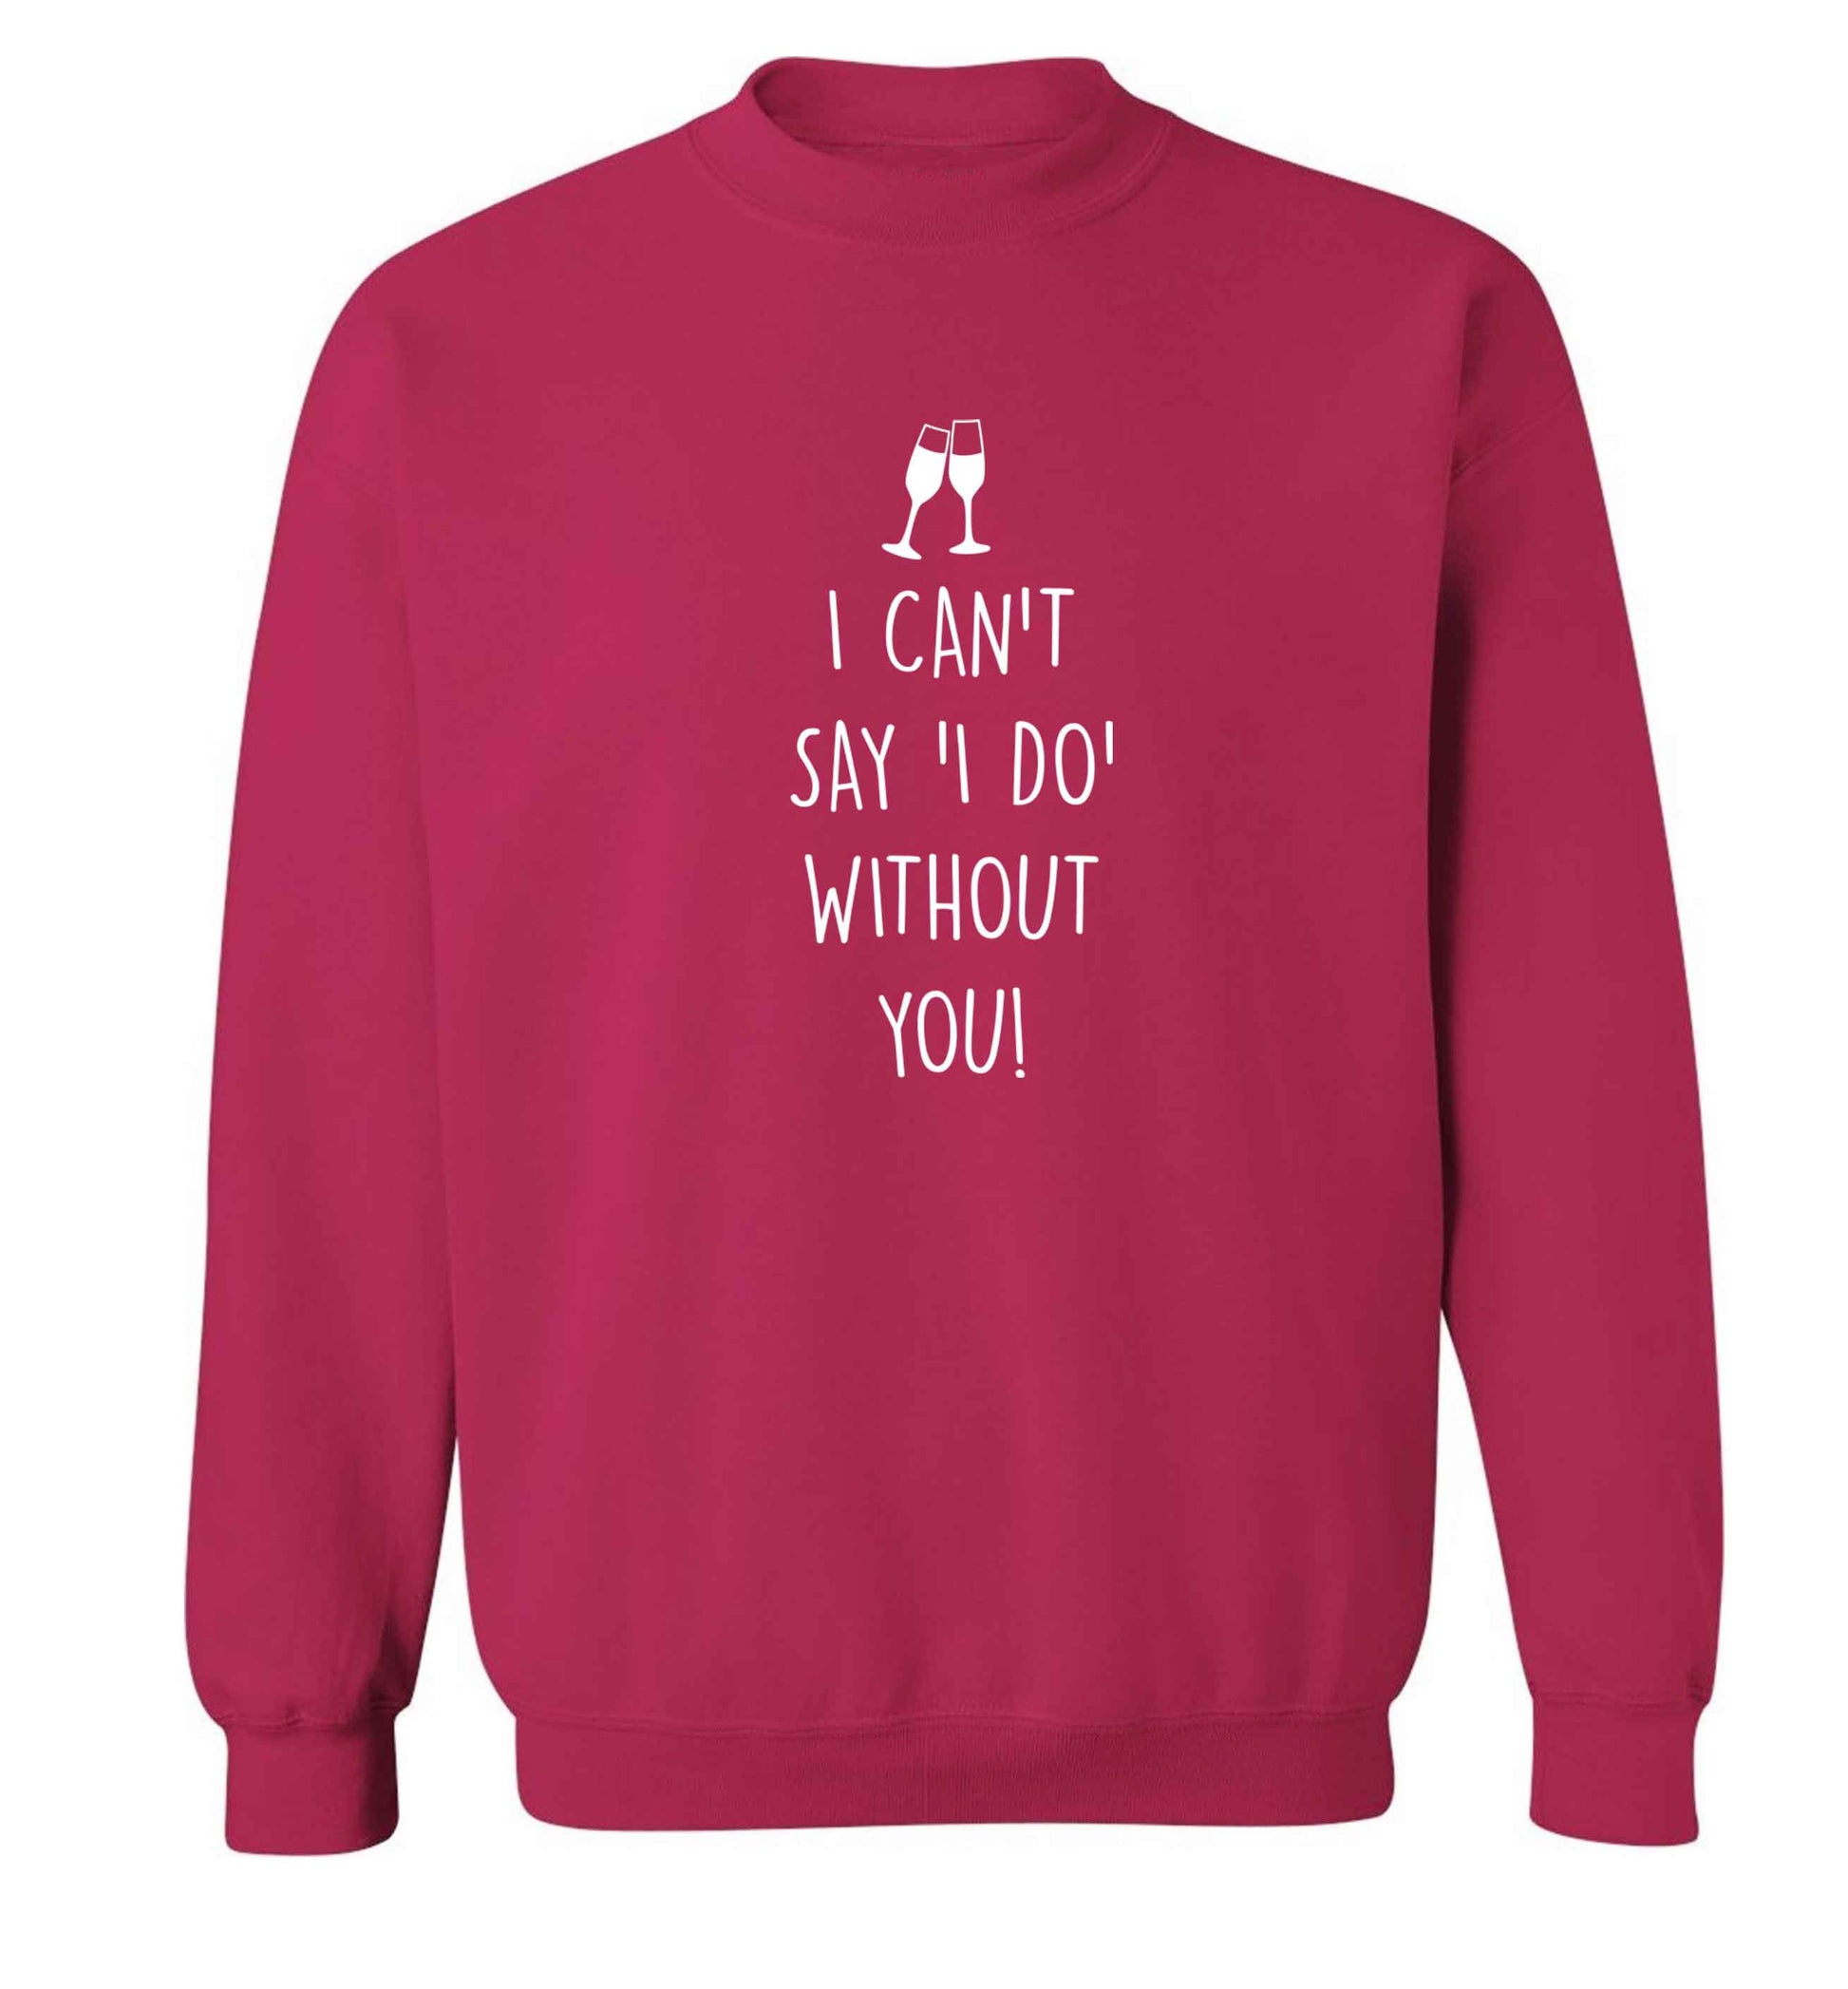 I can't say 'I do' without you! adult's unisex pink sweater 2XL